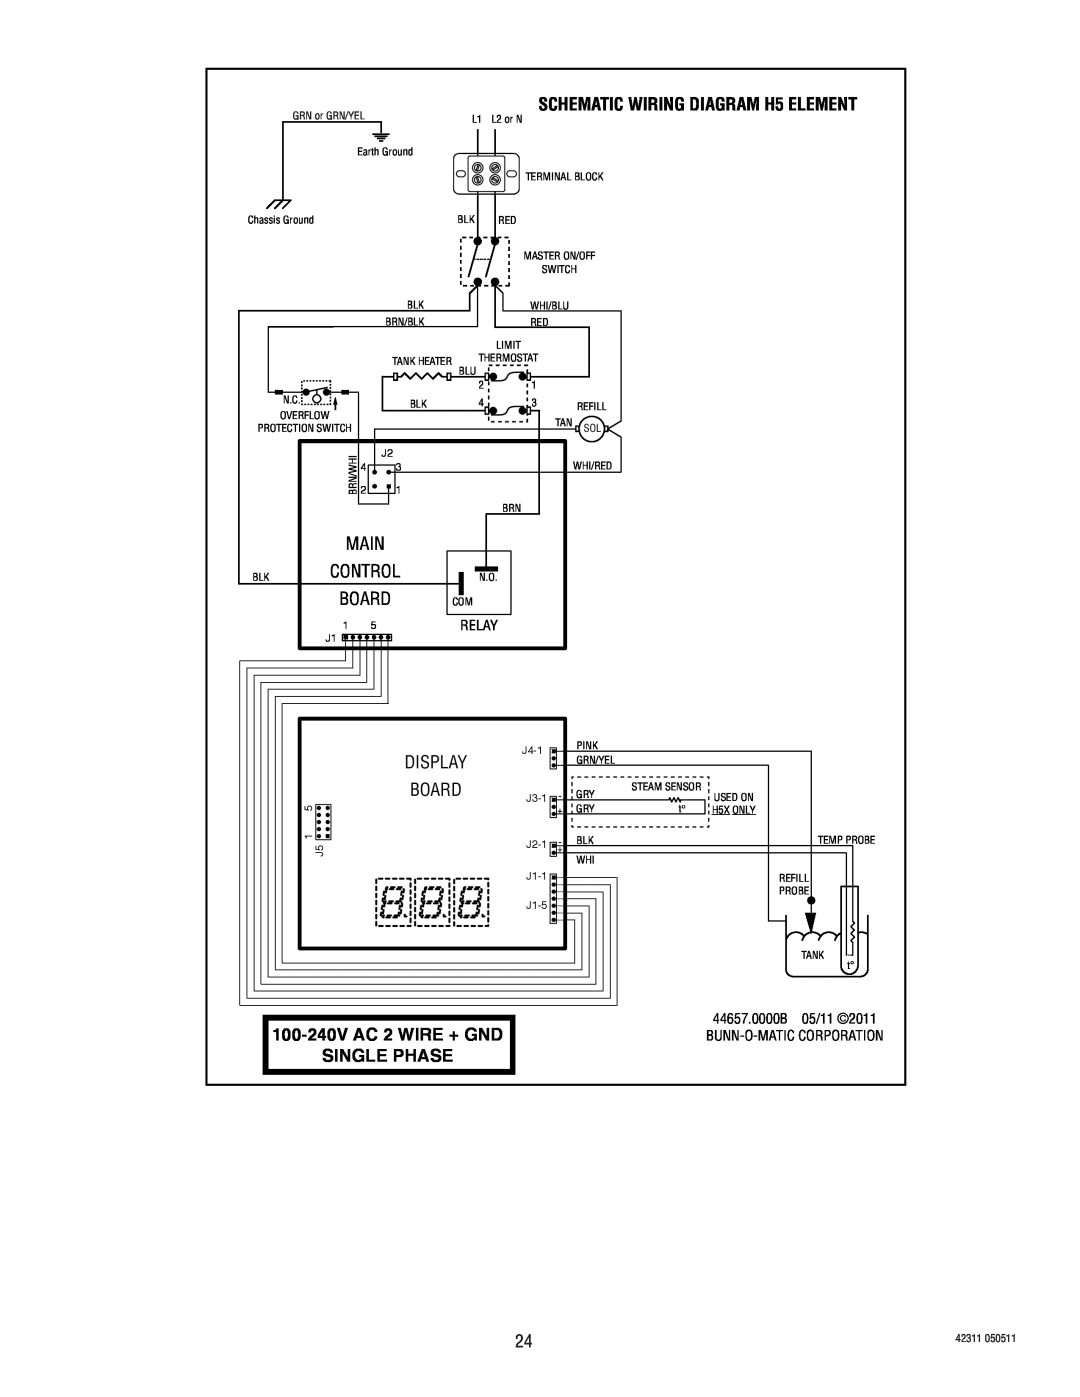 Bunn H5X SCHEMATIC WIRING DIAGRAM H5 ELEMENT, Display, Board, 100-240V AC 2 WIRE + GND, Single Phase, Main, Control, Relay 